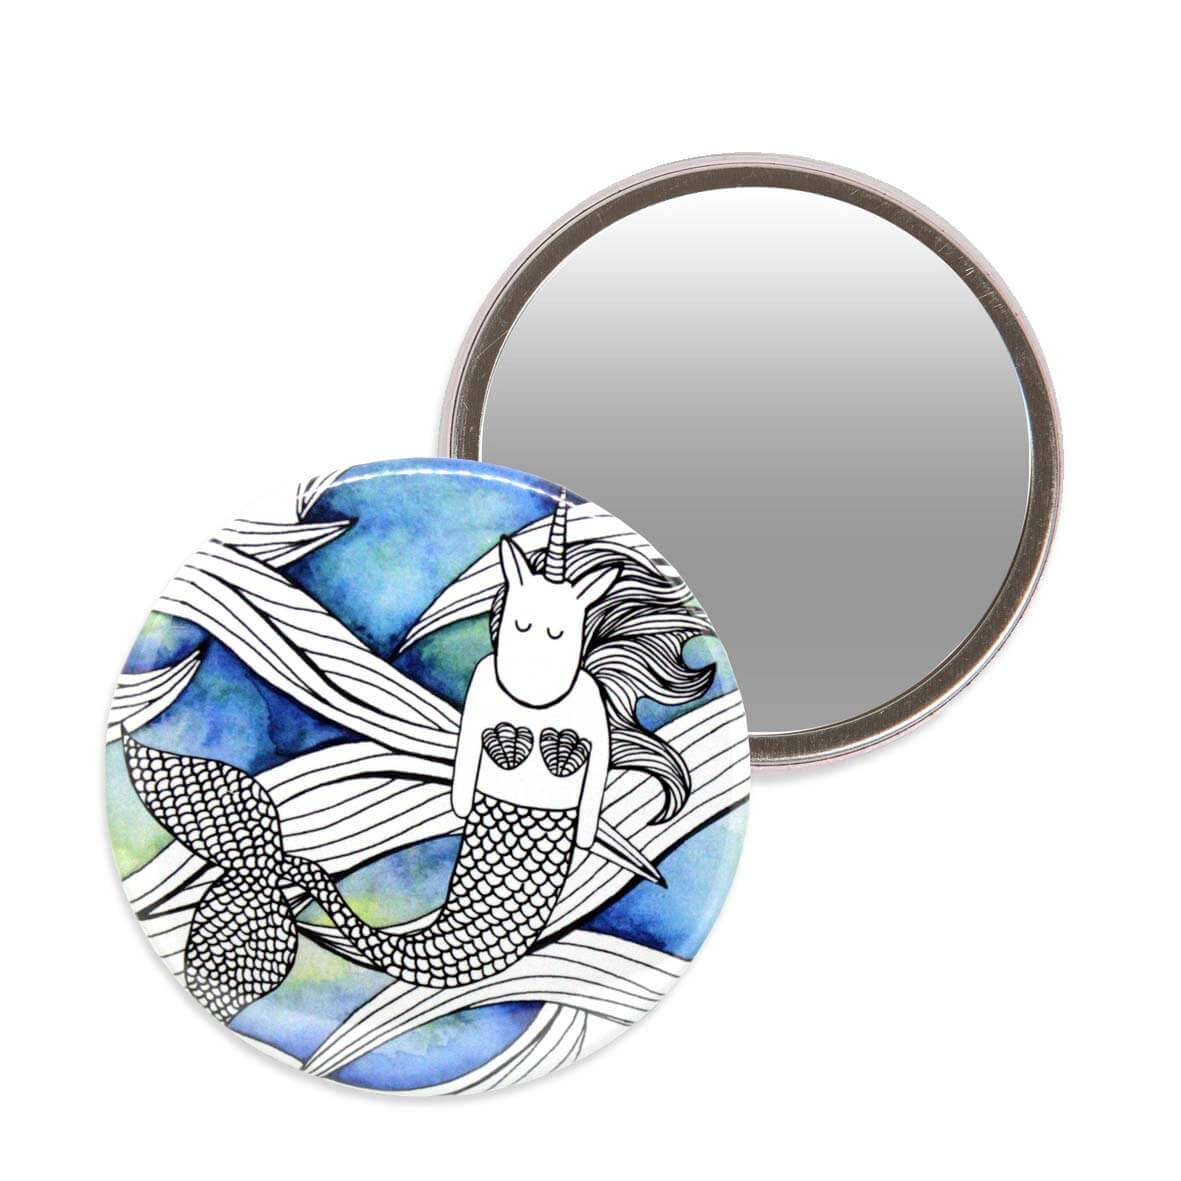 Makeup mirror with an illustration of a unicorn mermaid